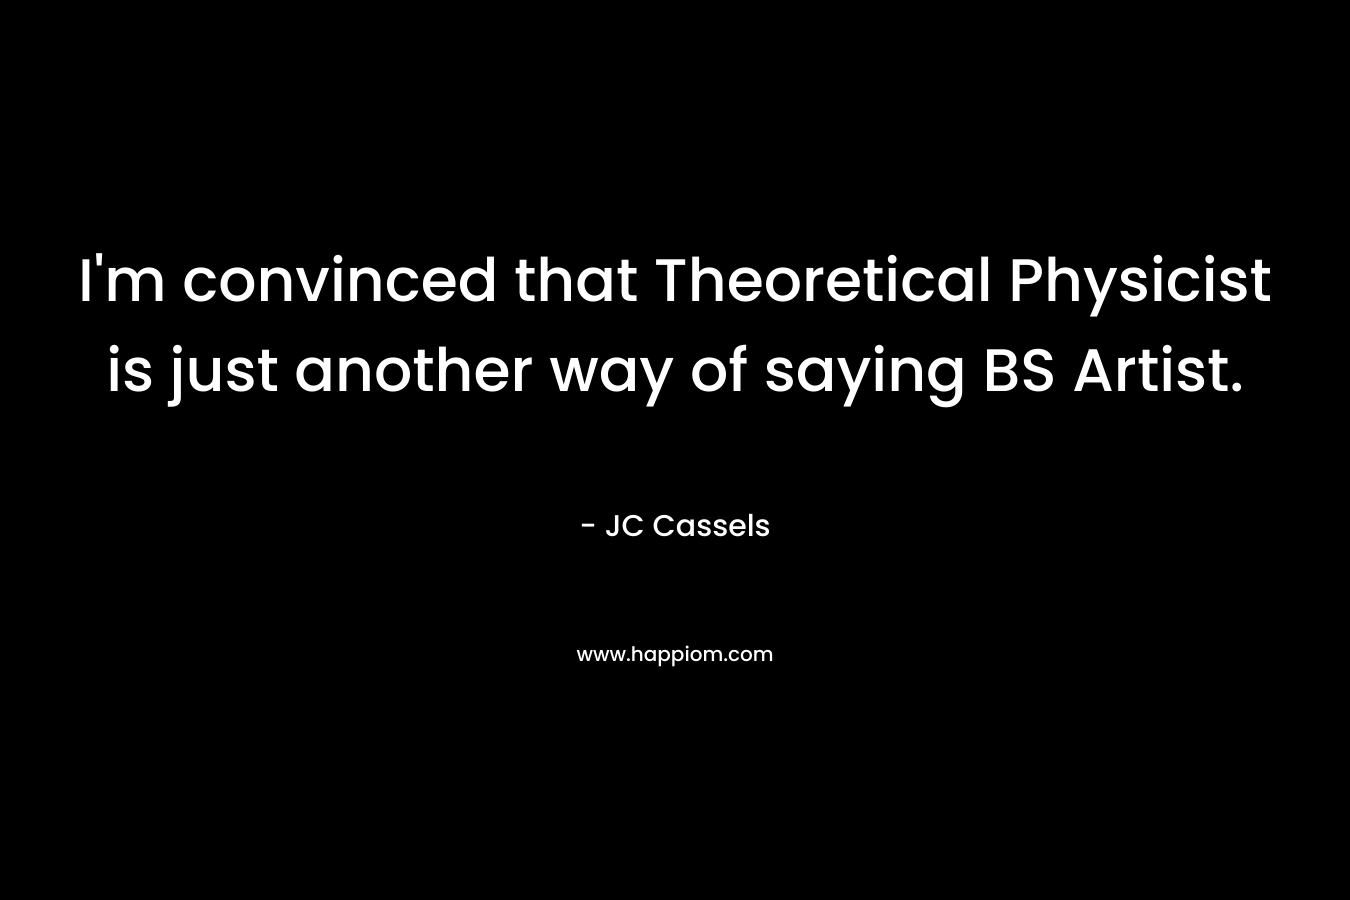 I'm convinced that Theoretical Physicist is just another way of saying BS Artist.